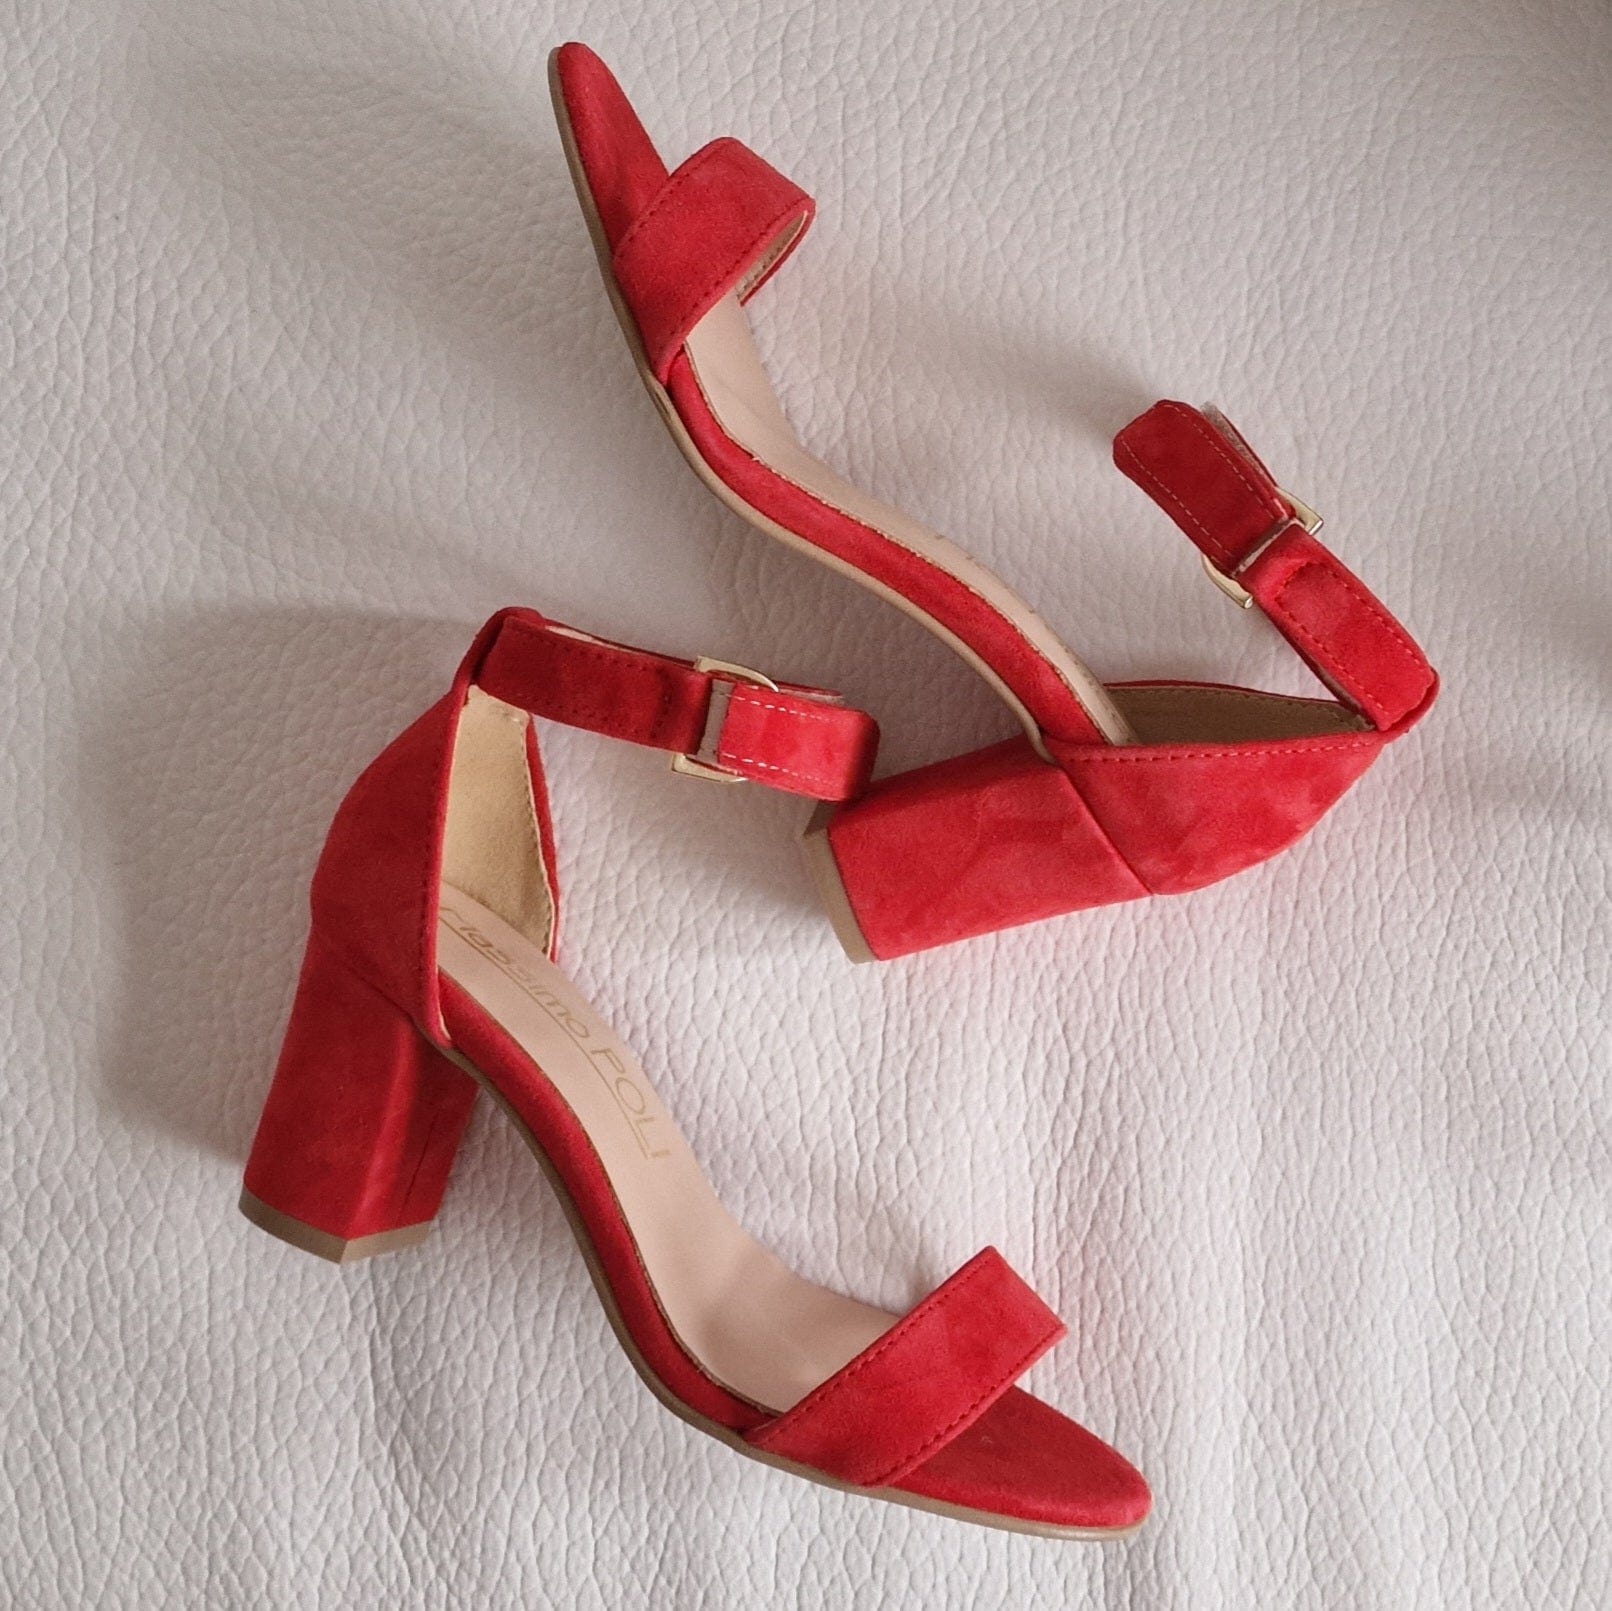 Small size red suede sandals